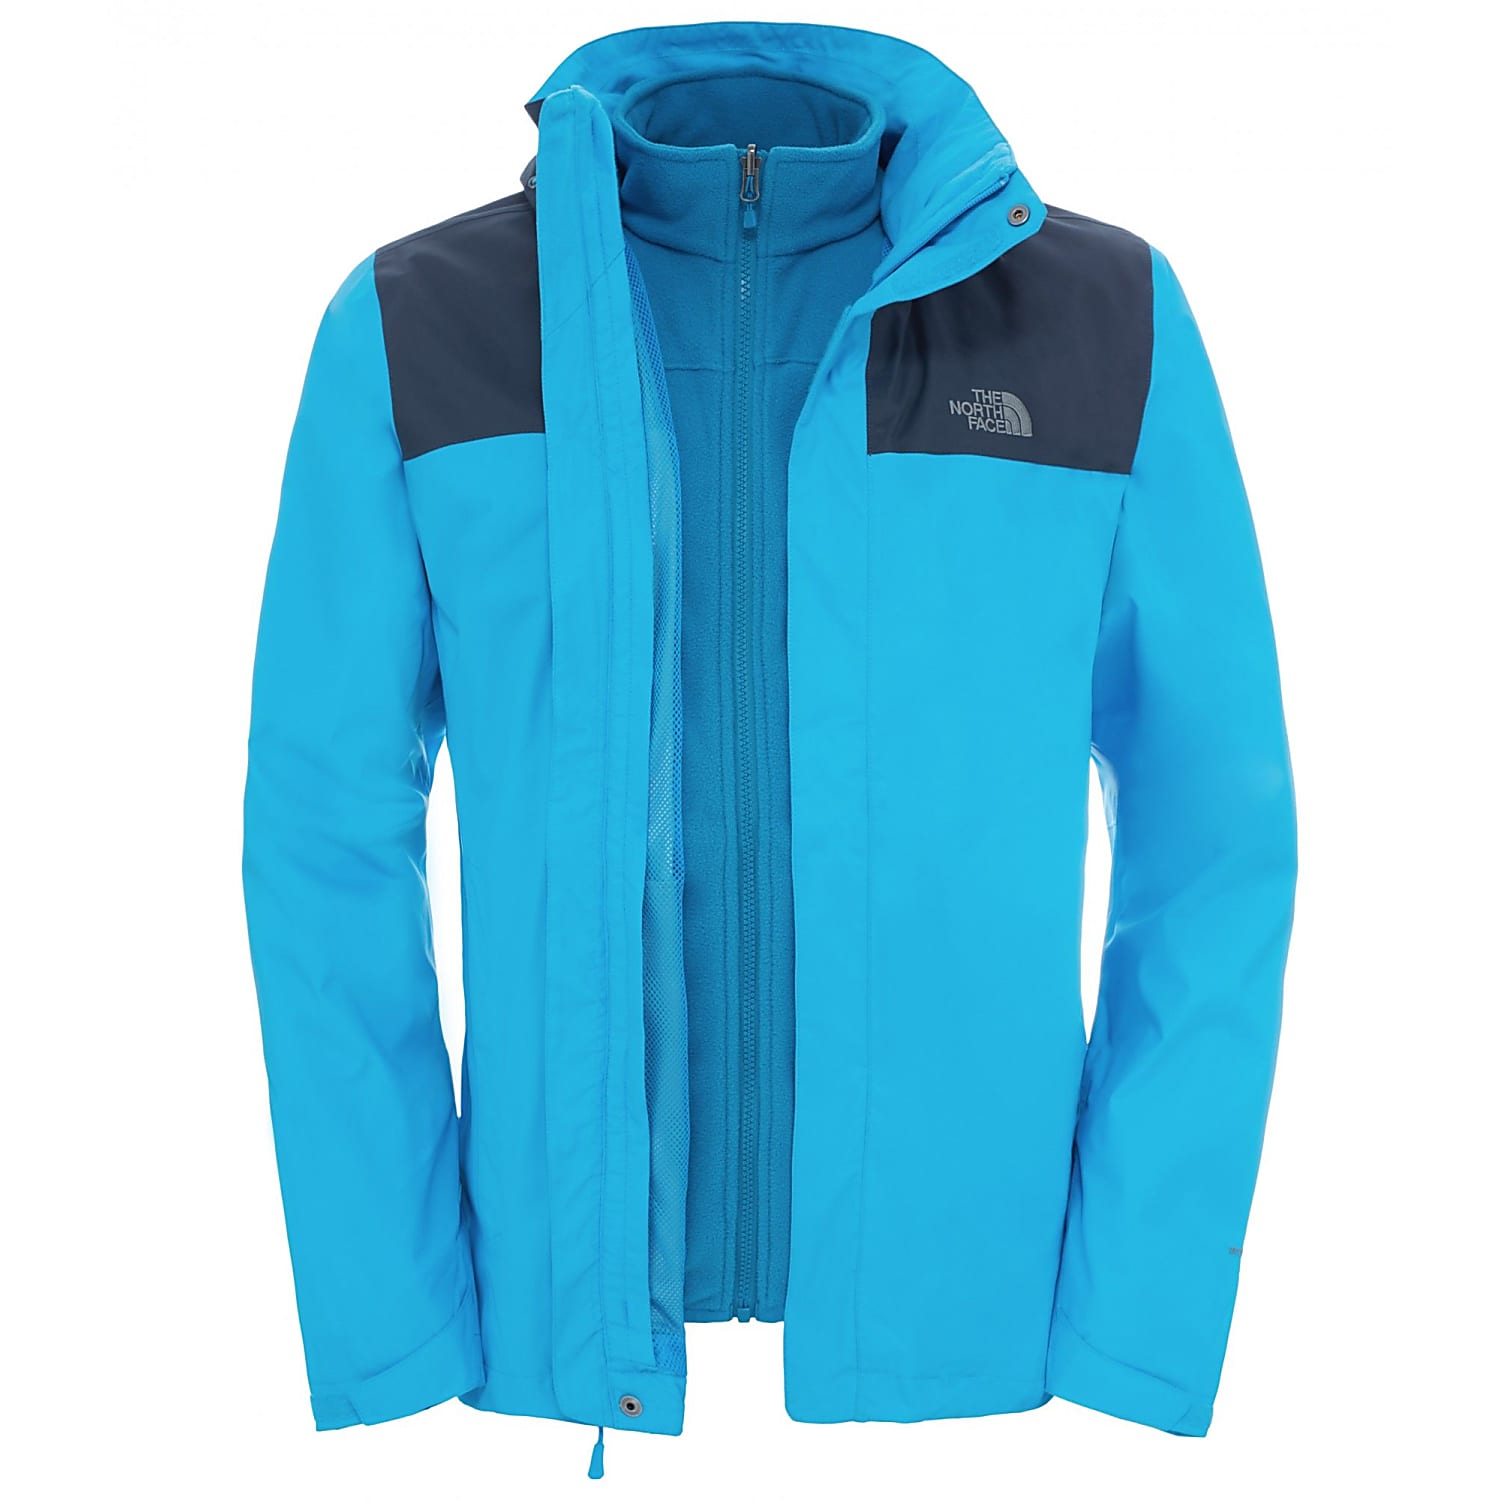 Navy Urban shipping and - The - II Aster Blue North cheap Fast EVOLVE M TRICLIMATE JACKET, Face